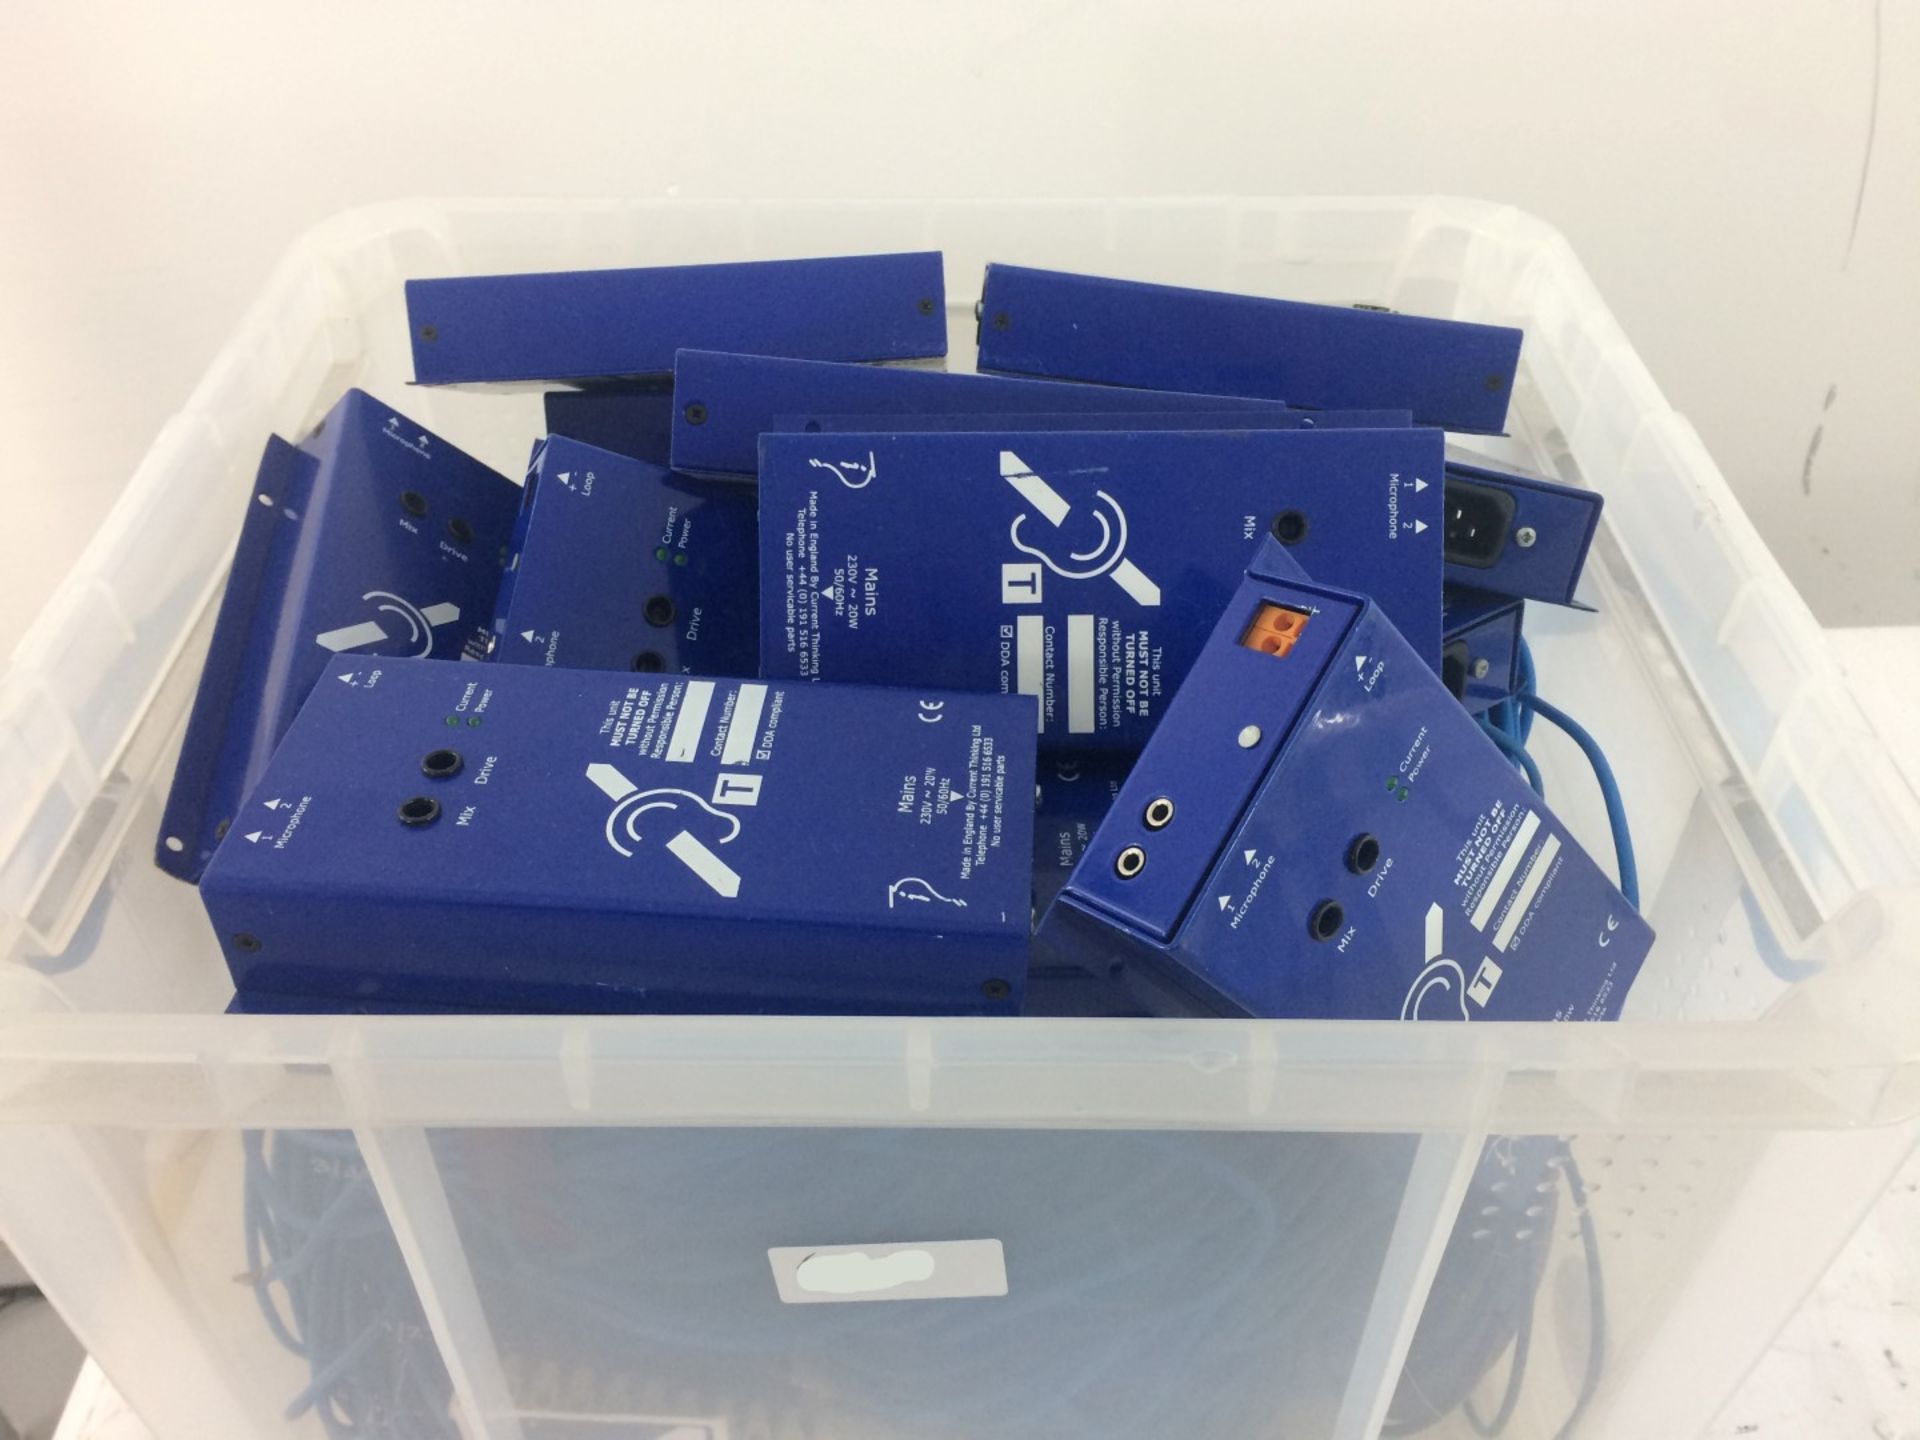 12 x INDUCTION LOOP SYSTEM INDUCTION BOXES Including CABLES (IN BOX) - Ref: 759 - CL581 - - Image 2 of 3